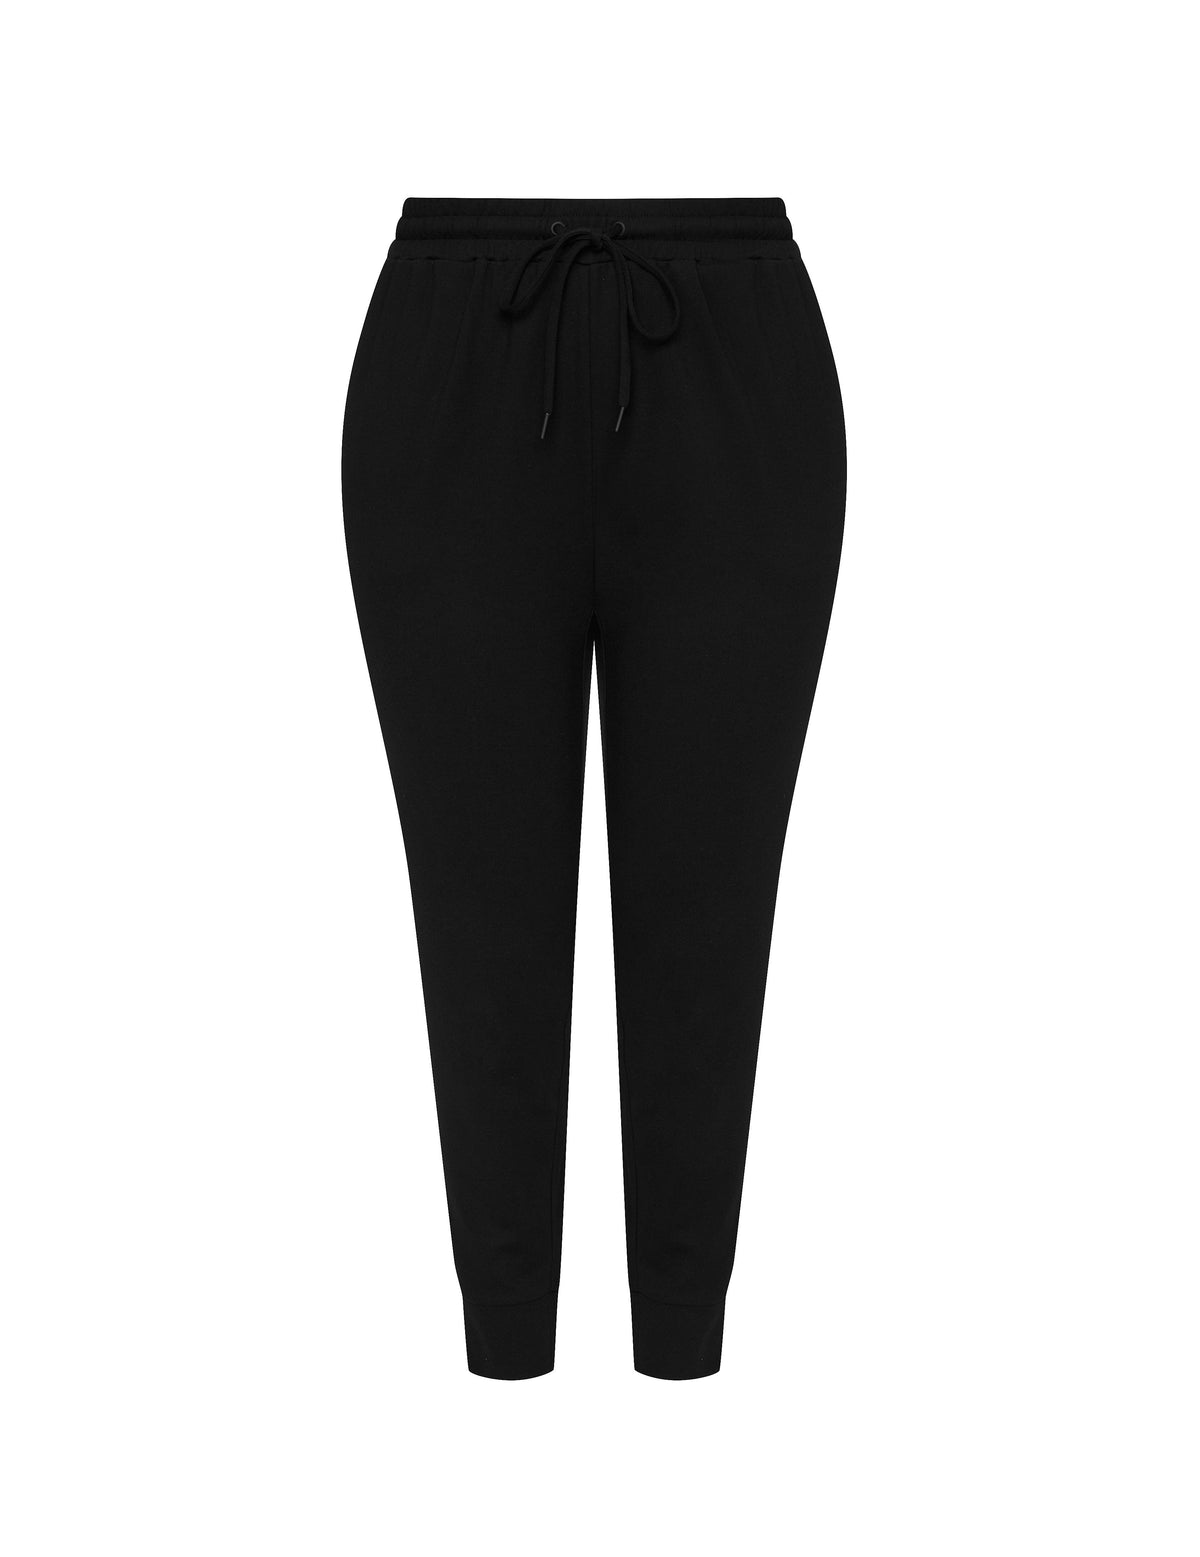 Plus Size Serenity Knit Pull-On Jogger